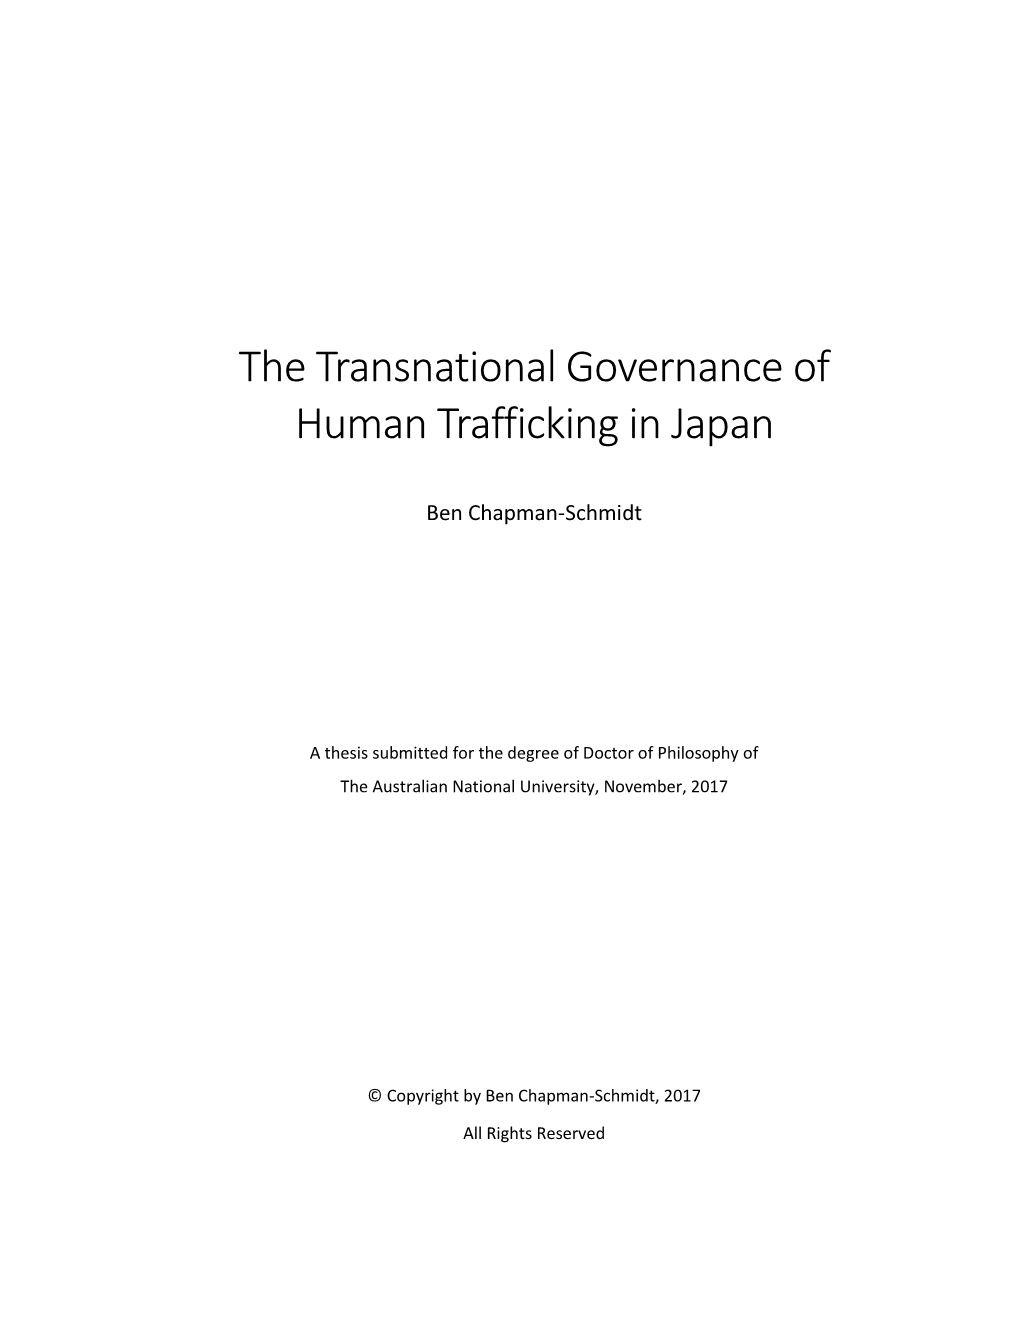 The Transnational Governance of Human Trafficking in Japan